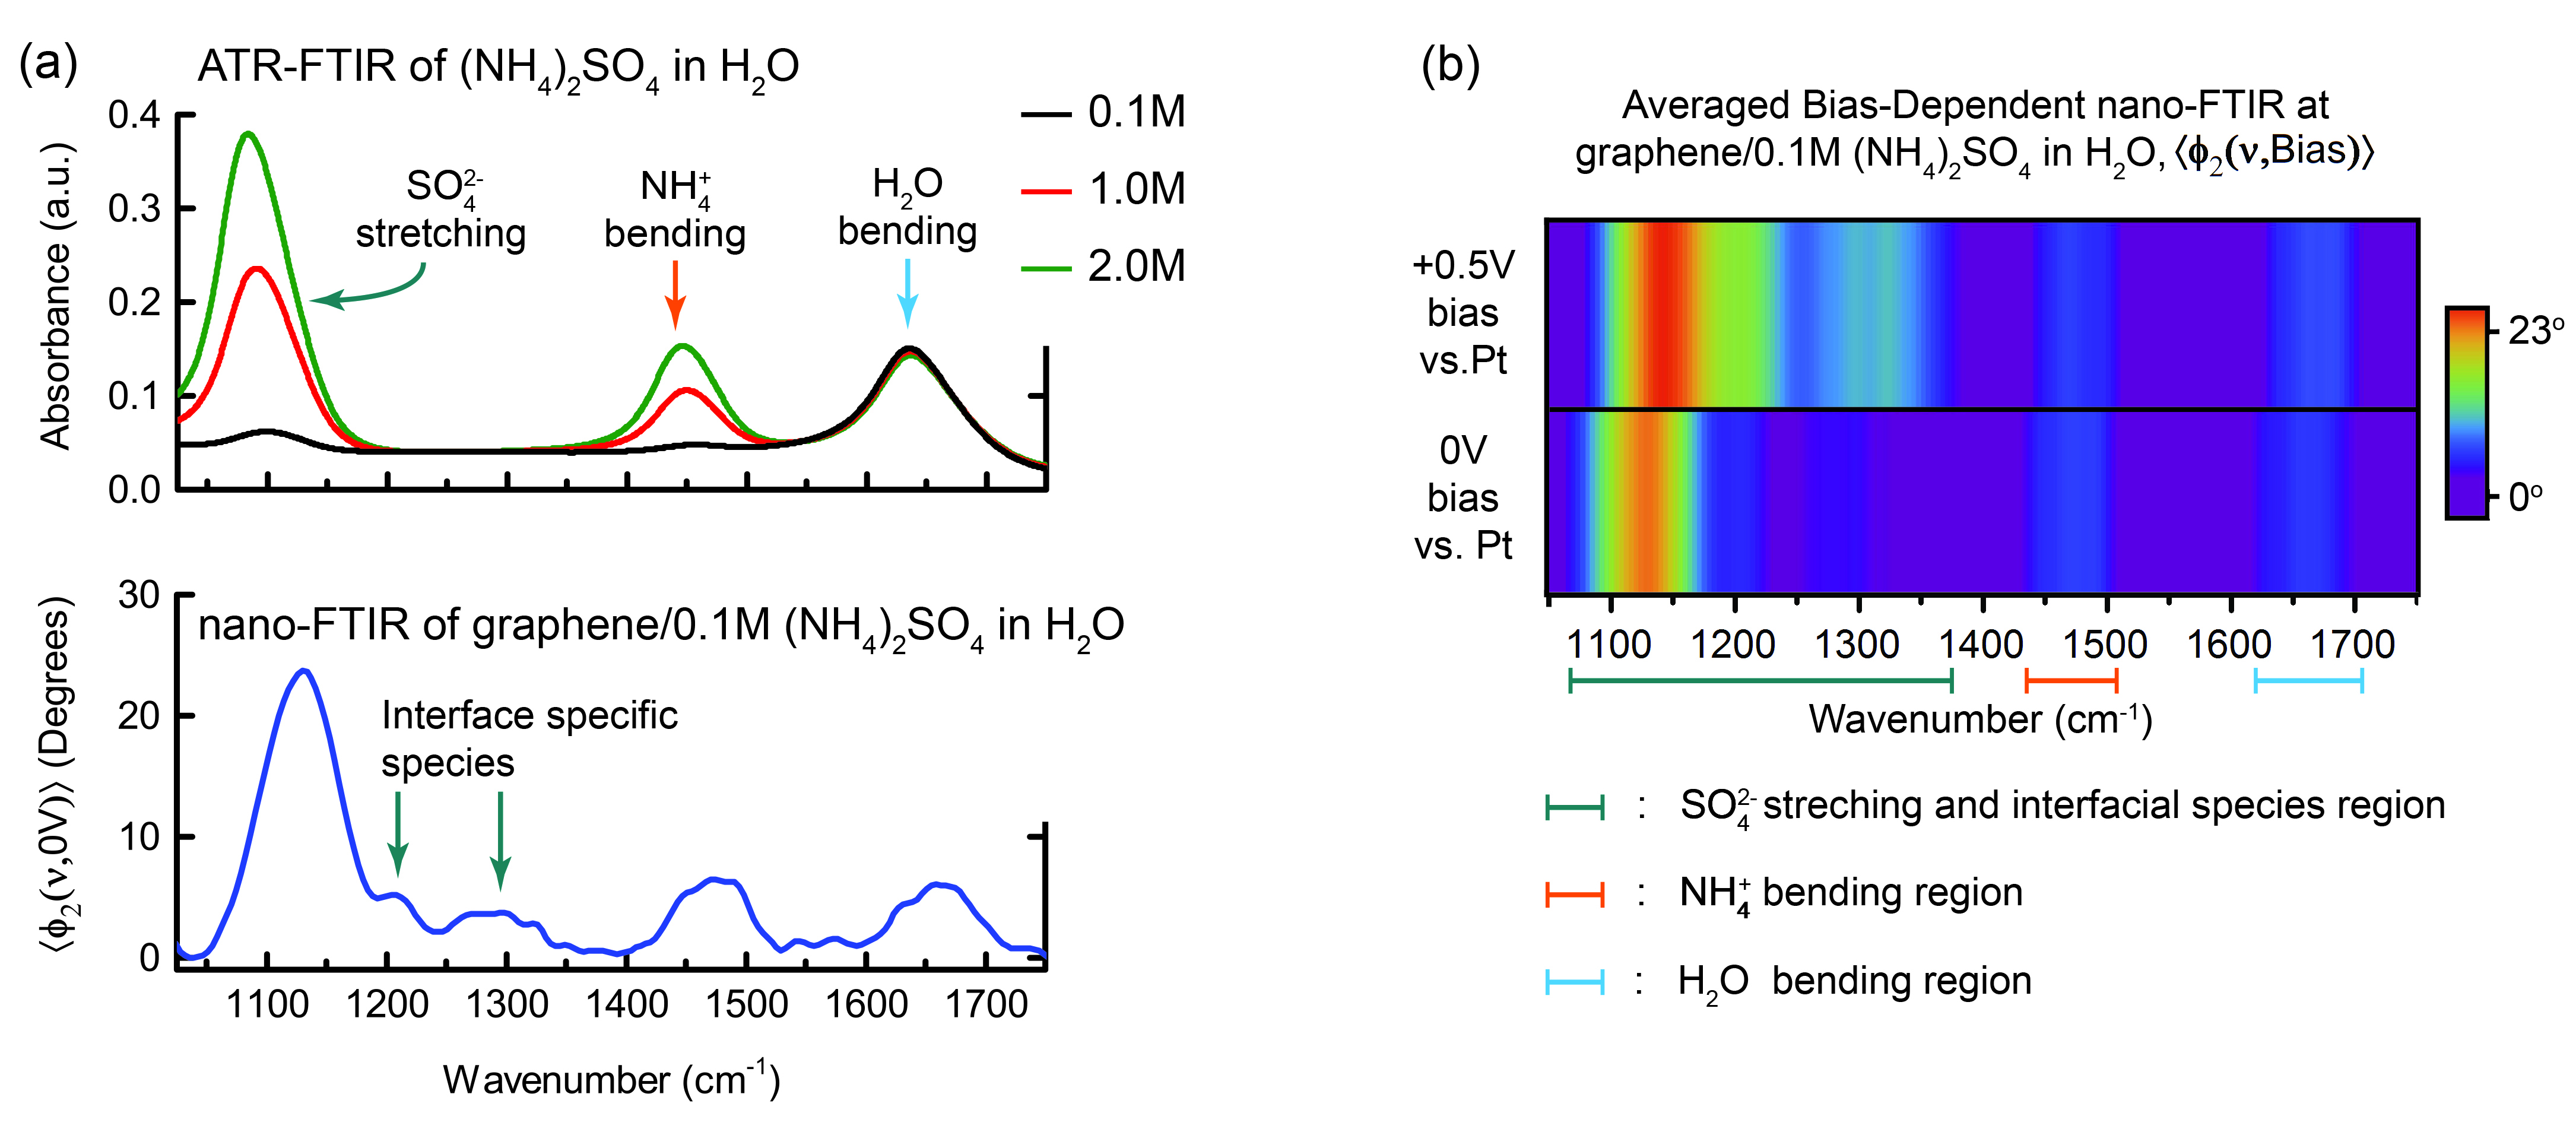 (a) Two FTIR spectra shown as line curves. (b) Two FTIR spectra shown as color maps.